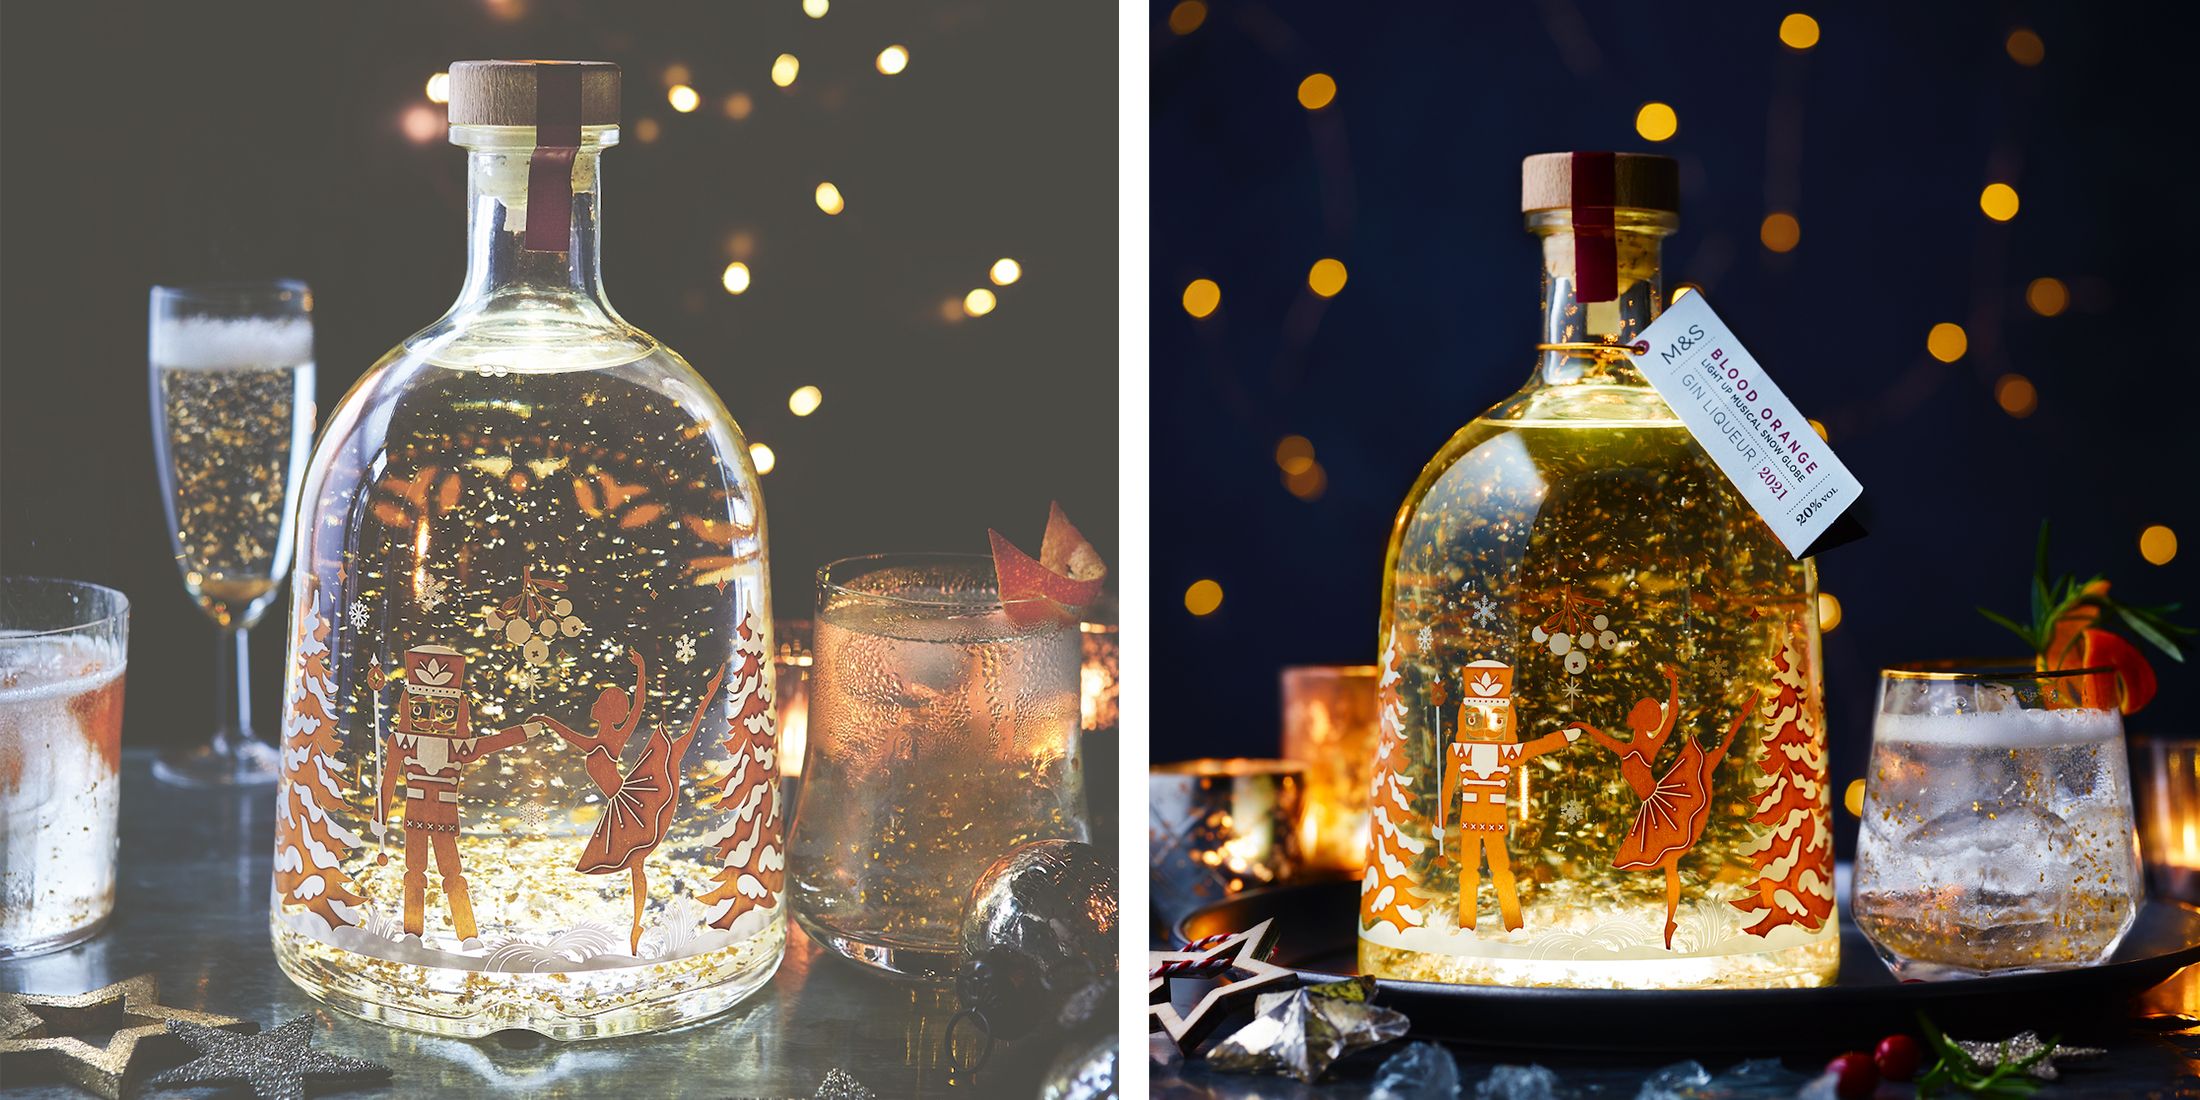 M&S is selling 1.5L magnums of sellout Light Up Snow Globe Gin Liqueur